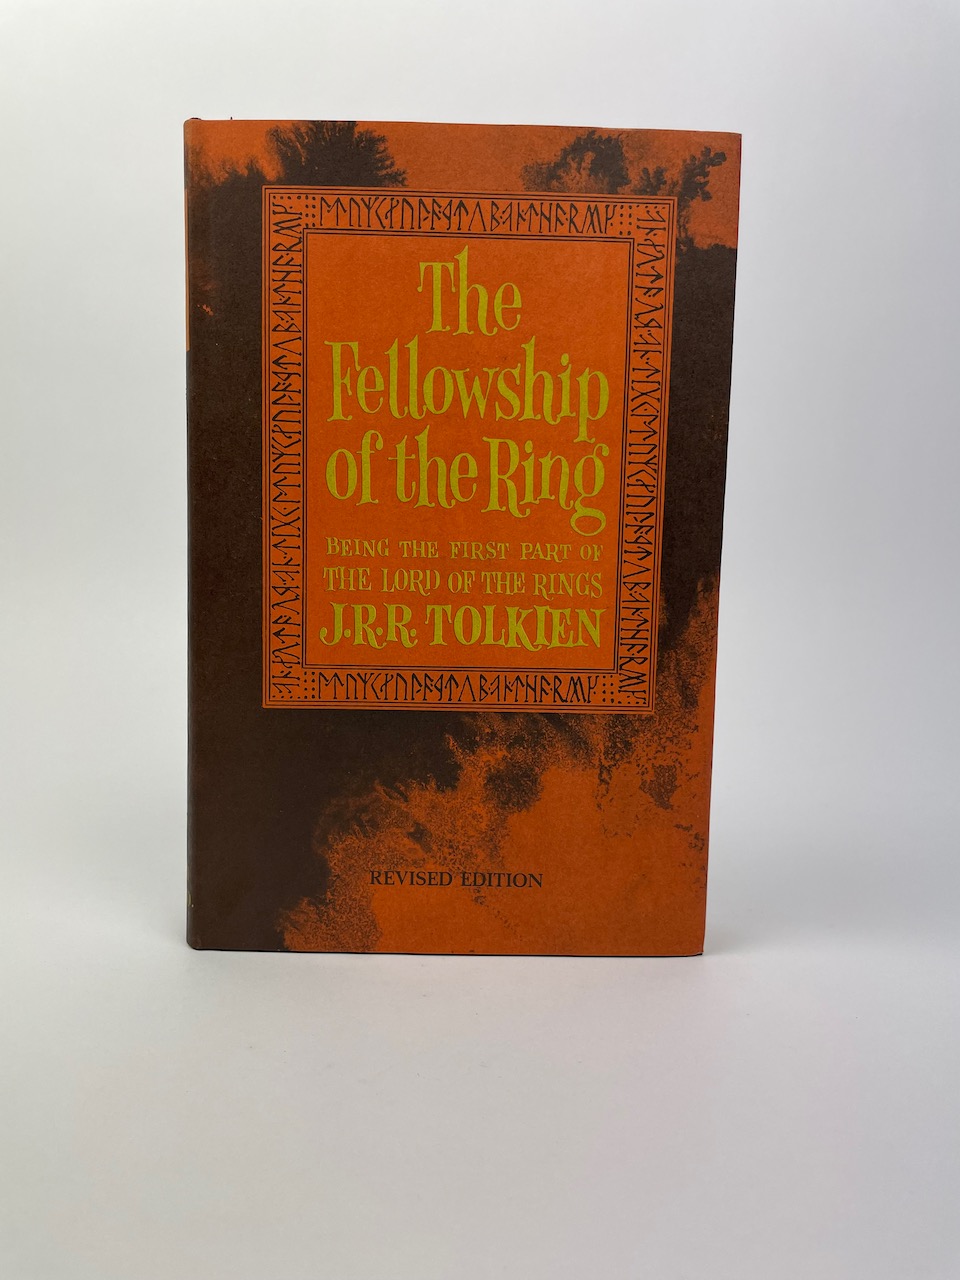 Lord of the Rings, 2nd US Edition in Original Publishers Slipcase and with Dustjackets 16